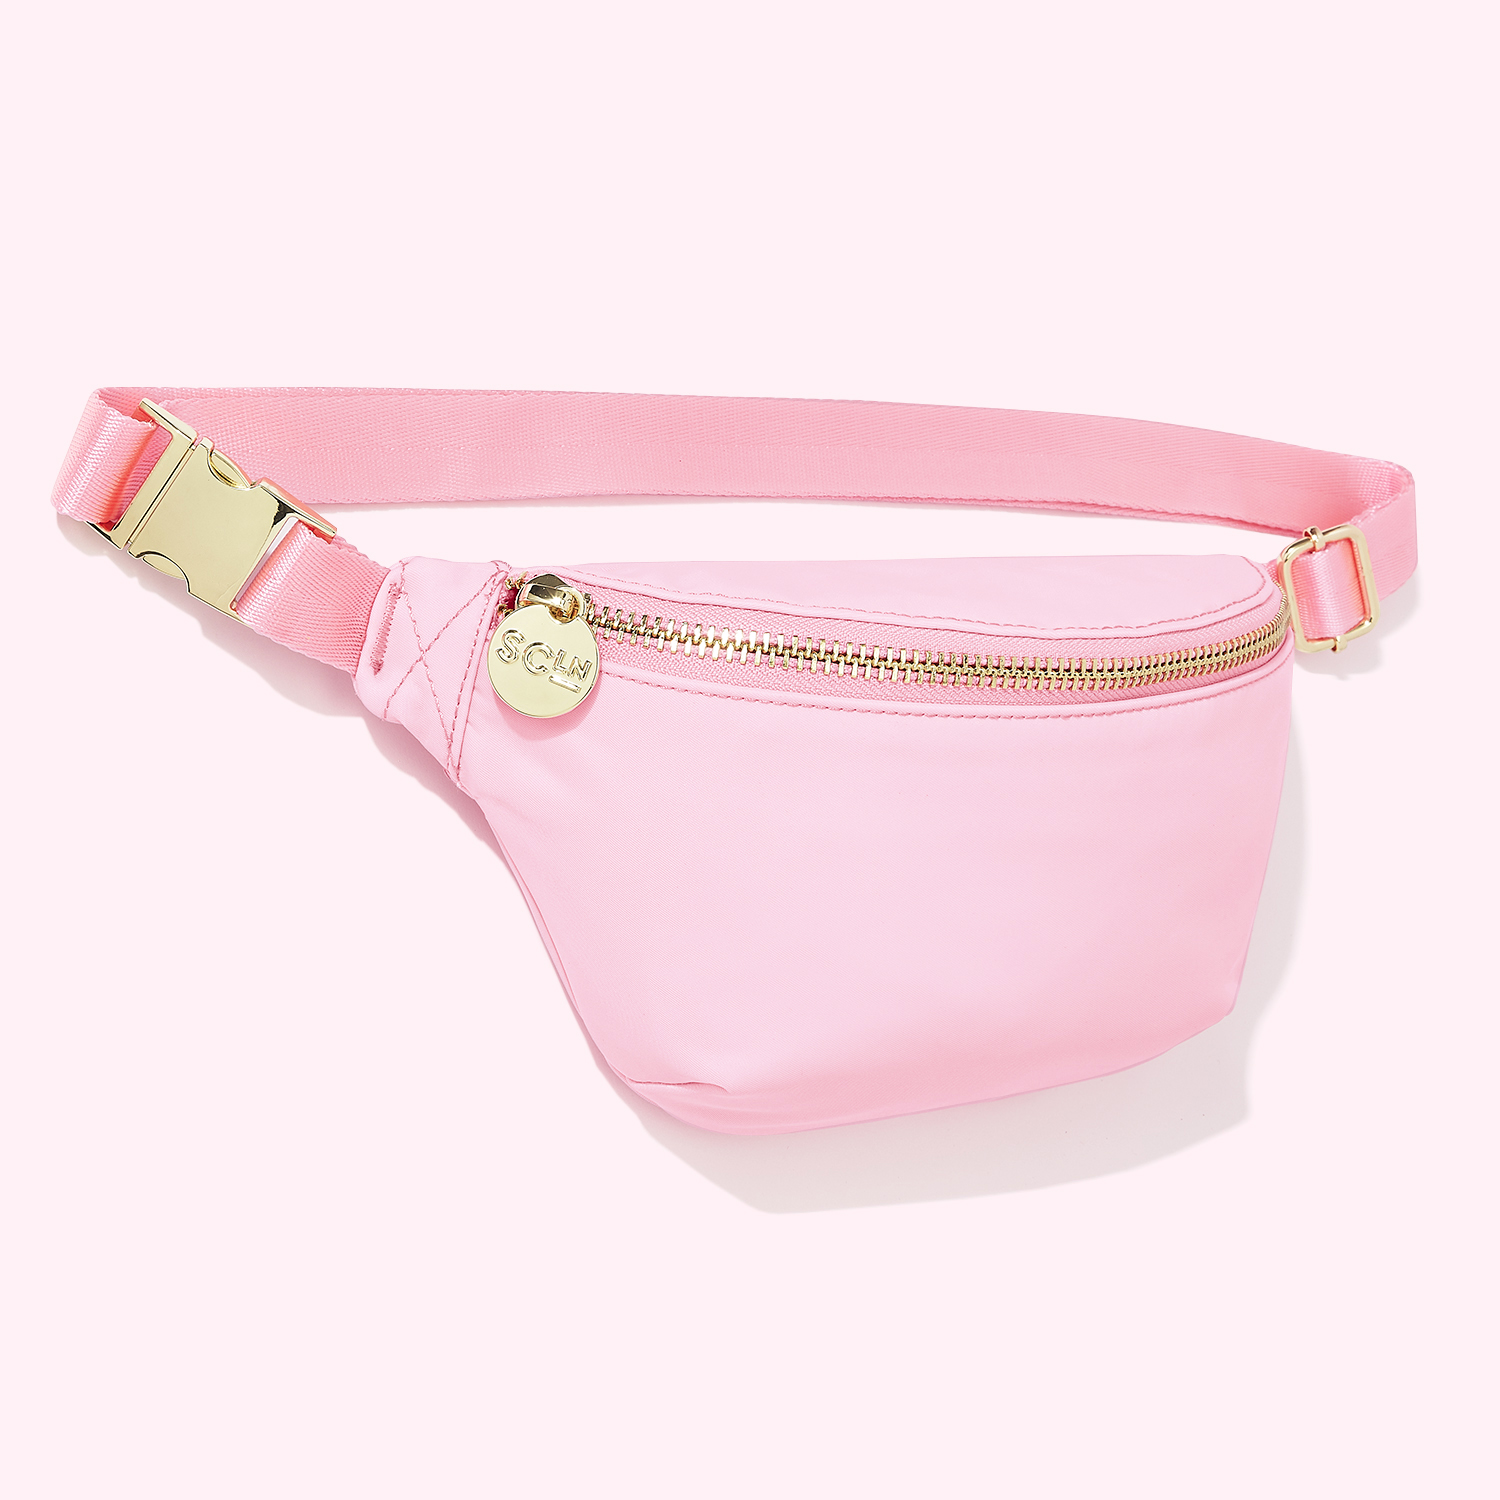 These Hot Girl Belt Bags Are Taking TikTok By Storm